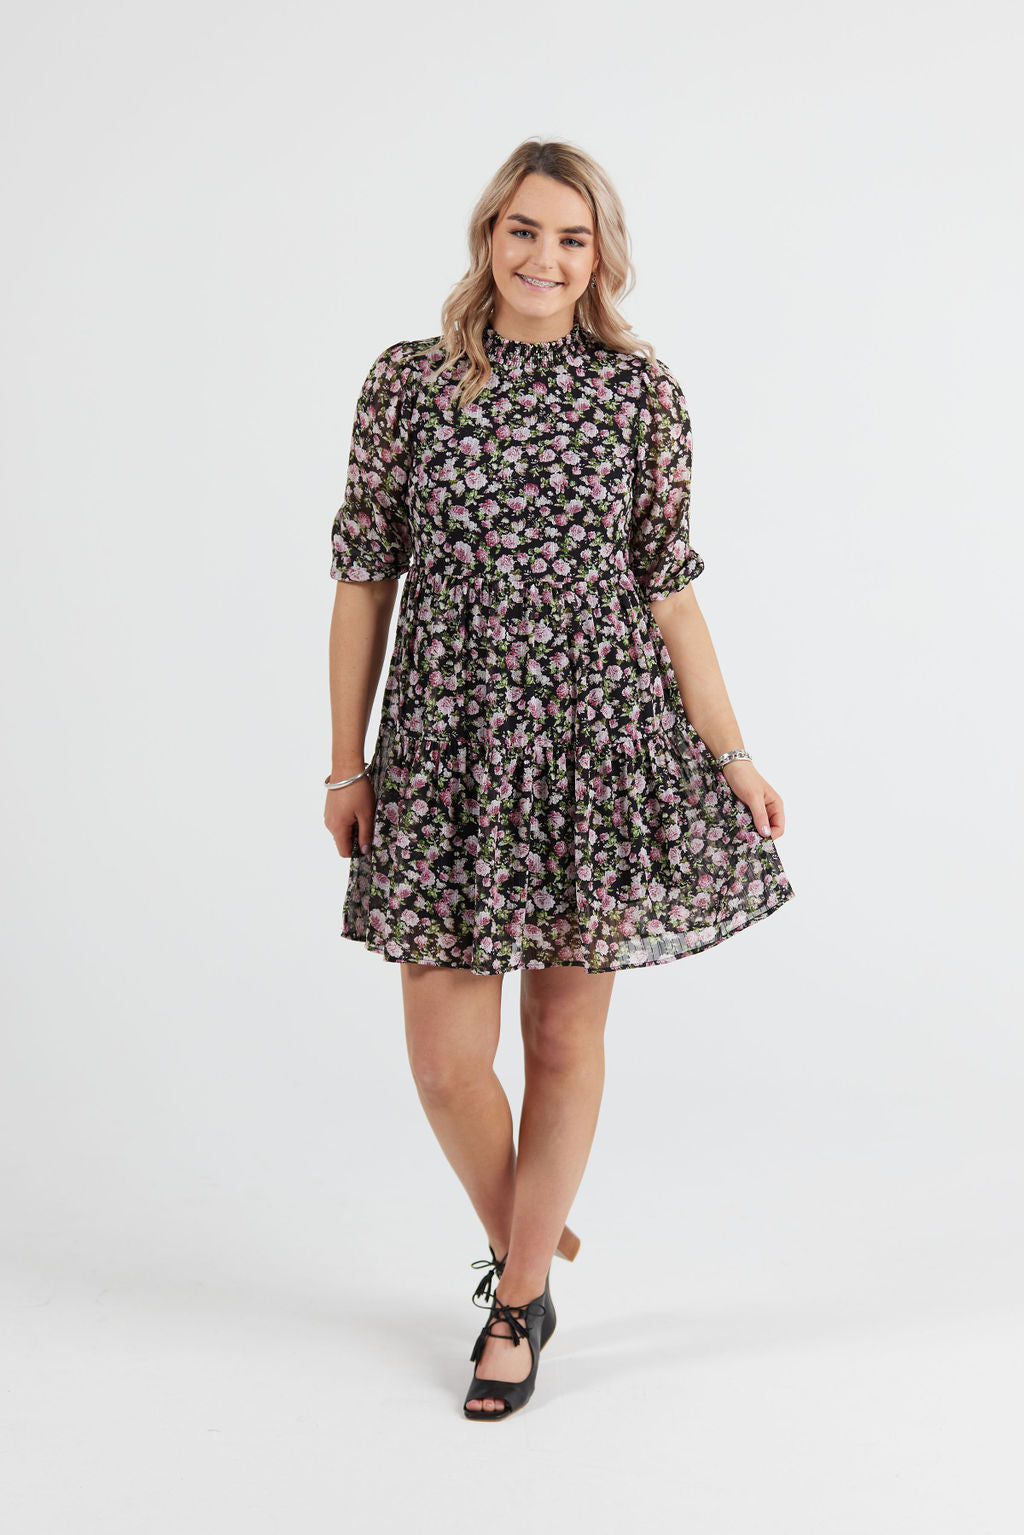 Fairlie Dress Rose Deluxe - EXCLUSIVE TO MINT